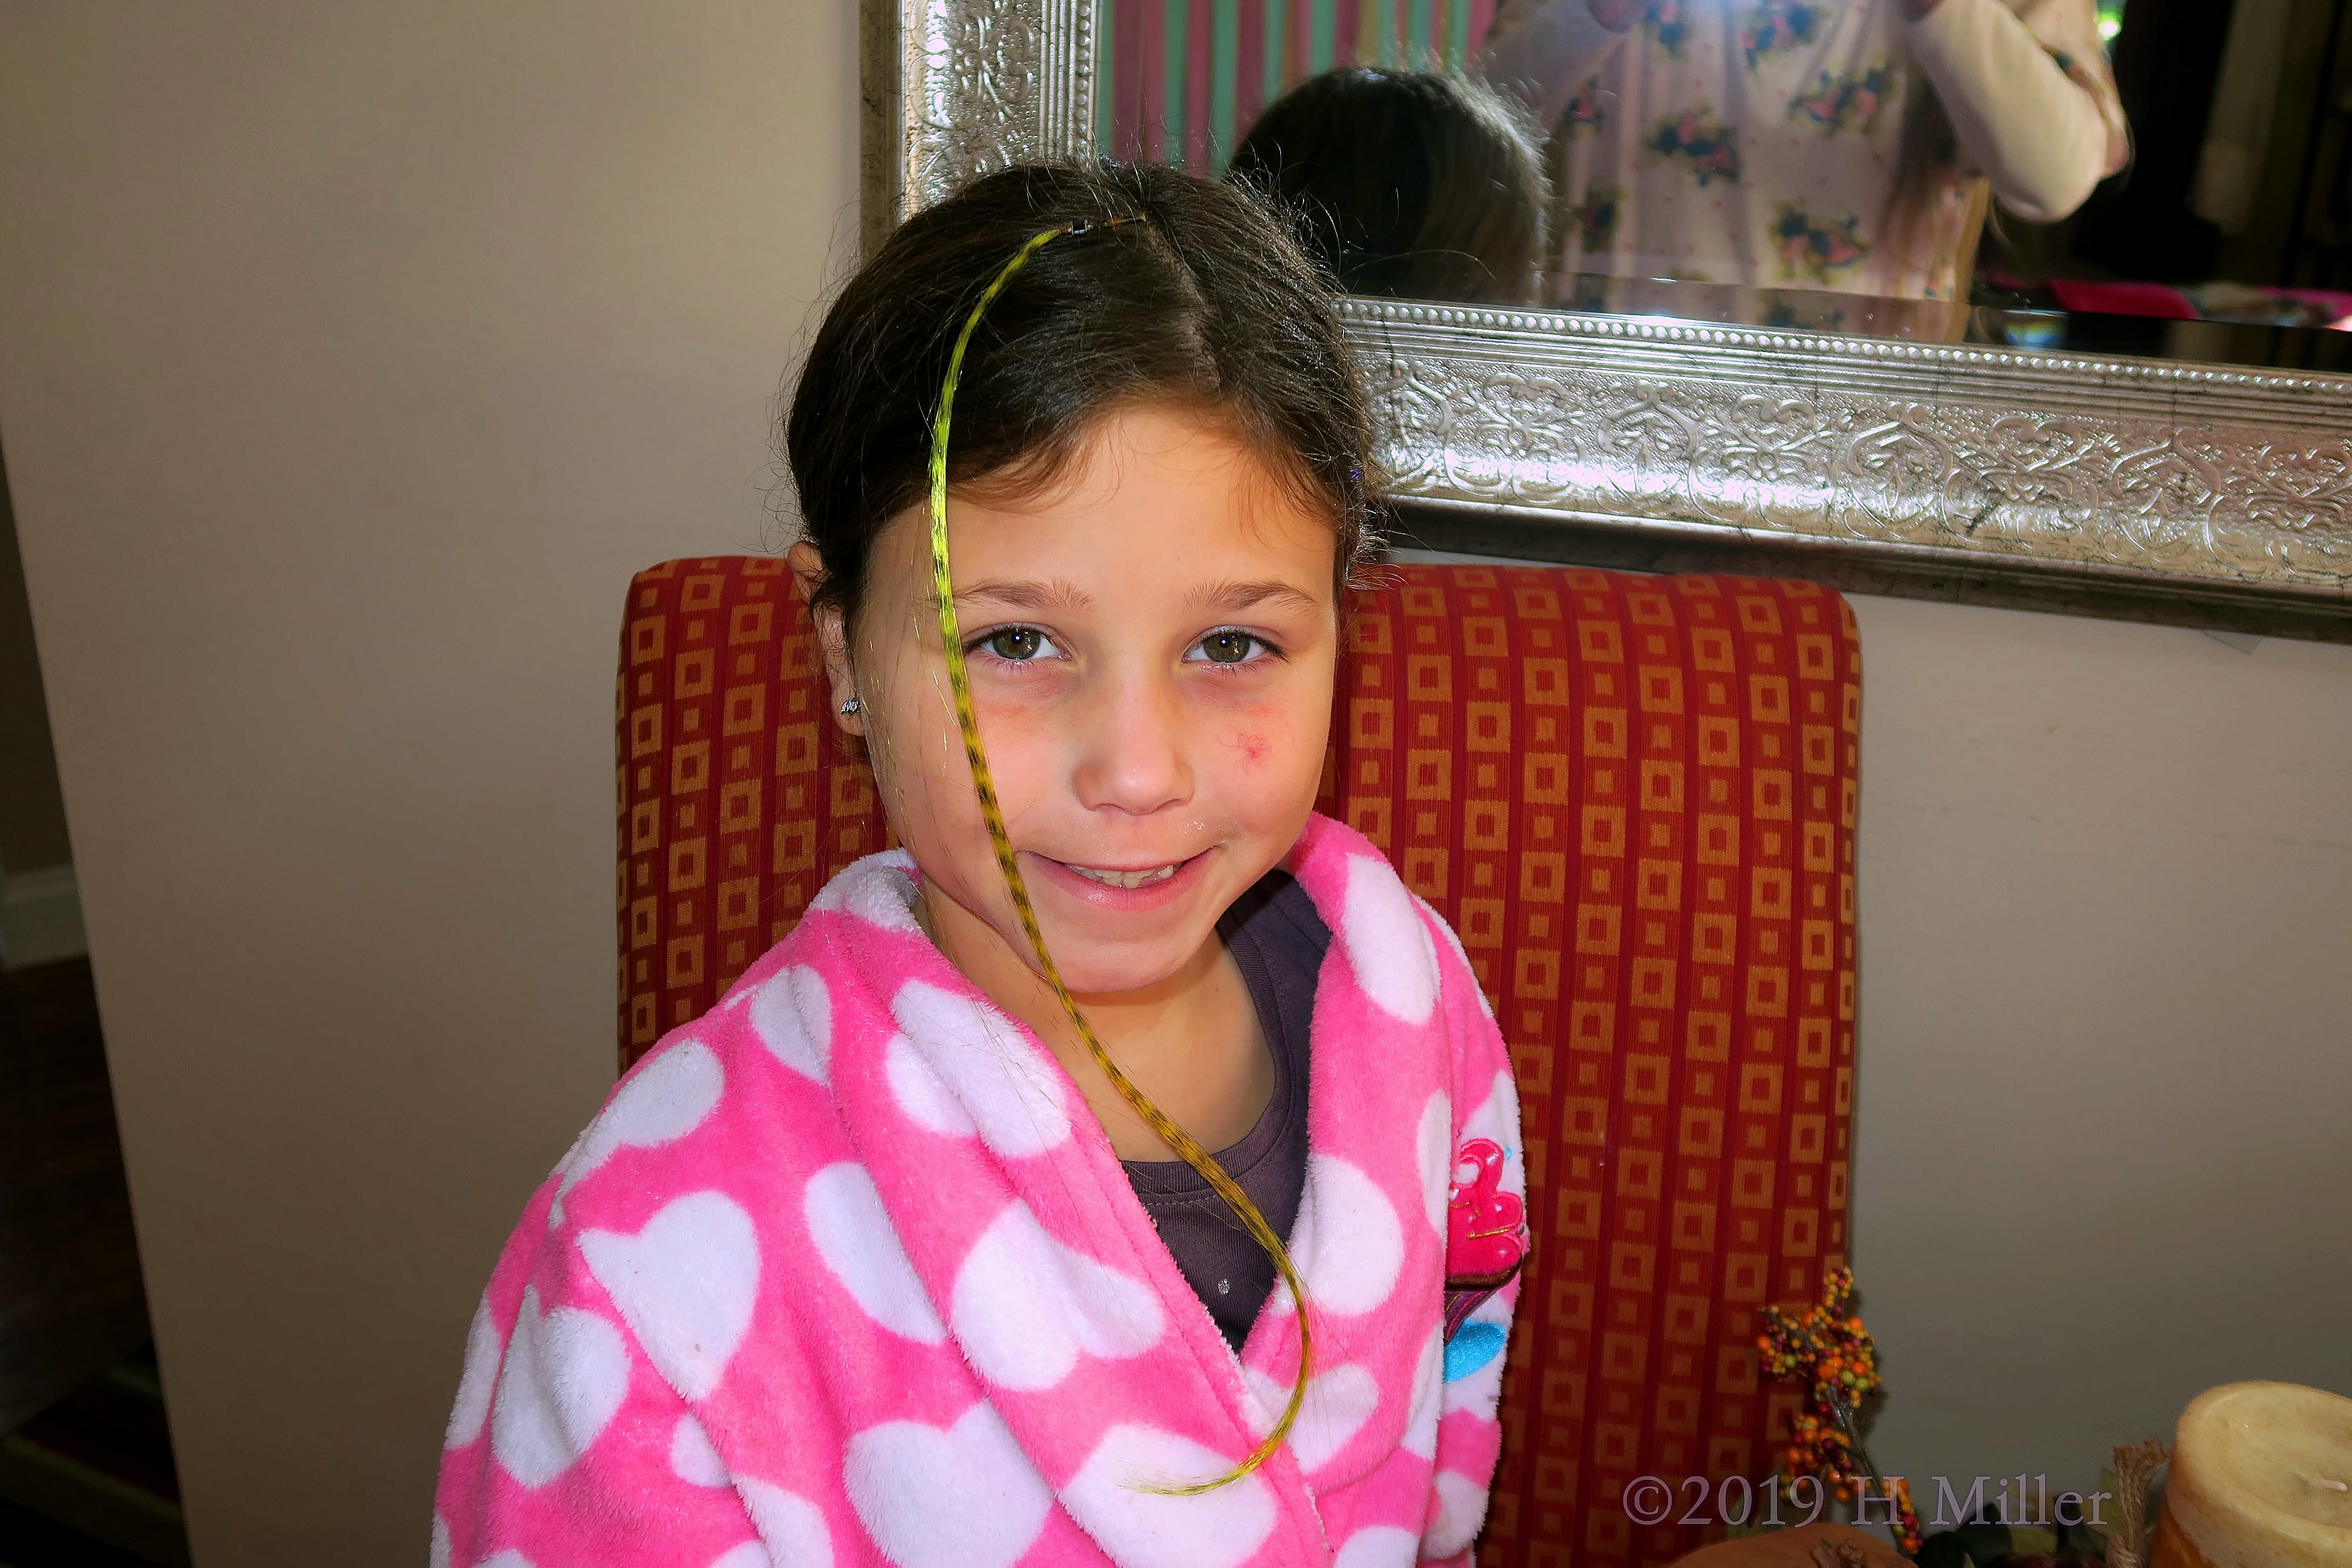 Clipped In A Golden Glow! Kids Hairstyle Featuring Yellow Hair Feather! 4